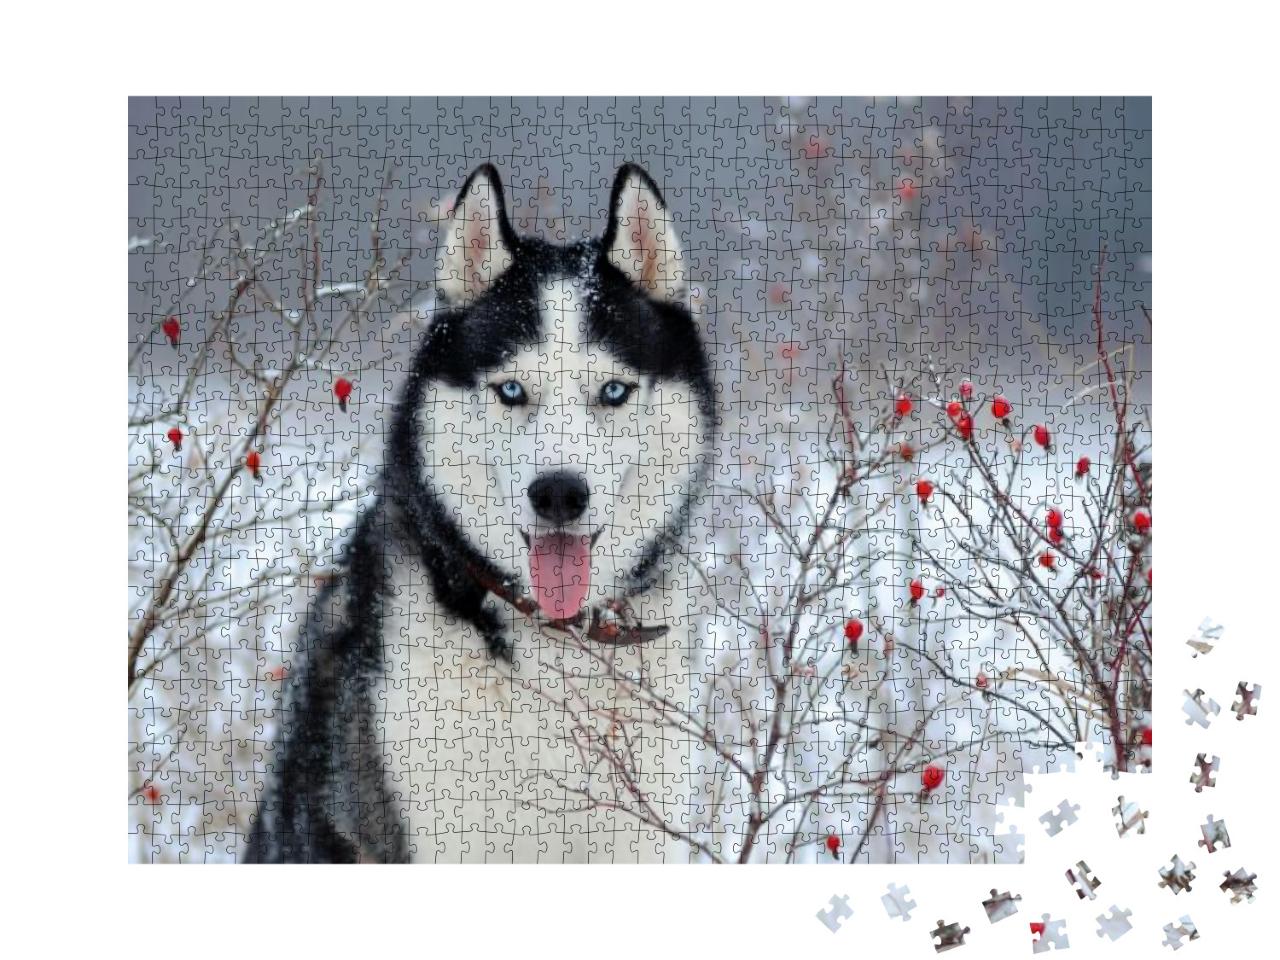 Siberian Husky Dog Black & White Color with Blue Eyes in... Jigsaw Puzzle with 1000 pieces